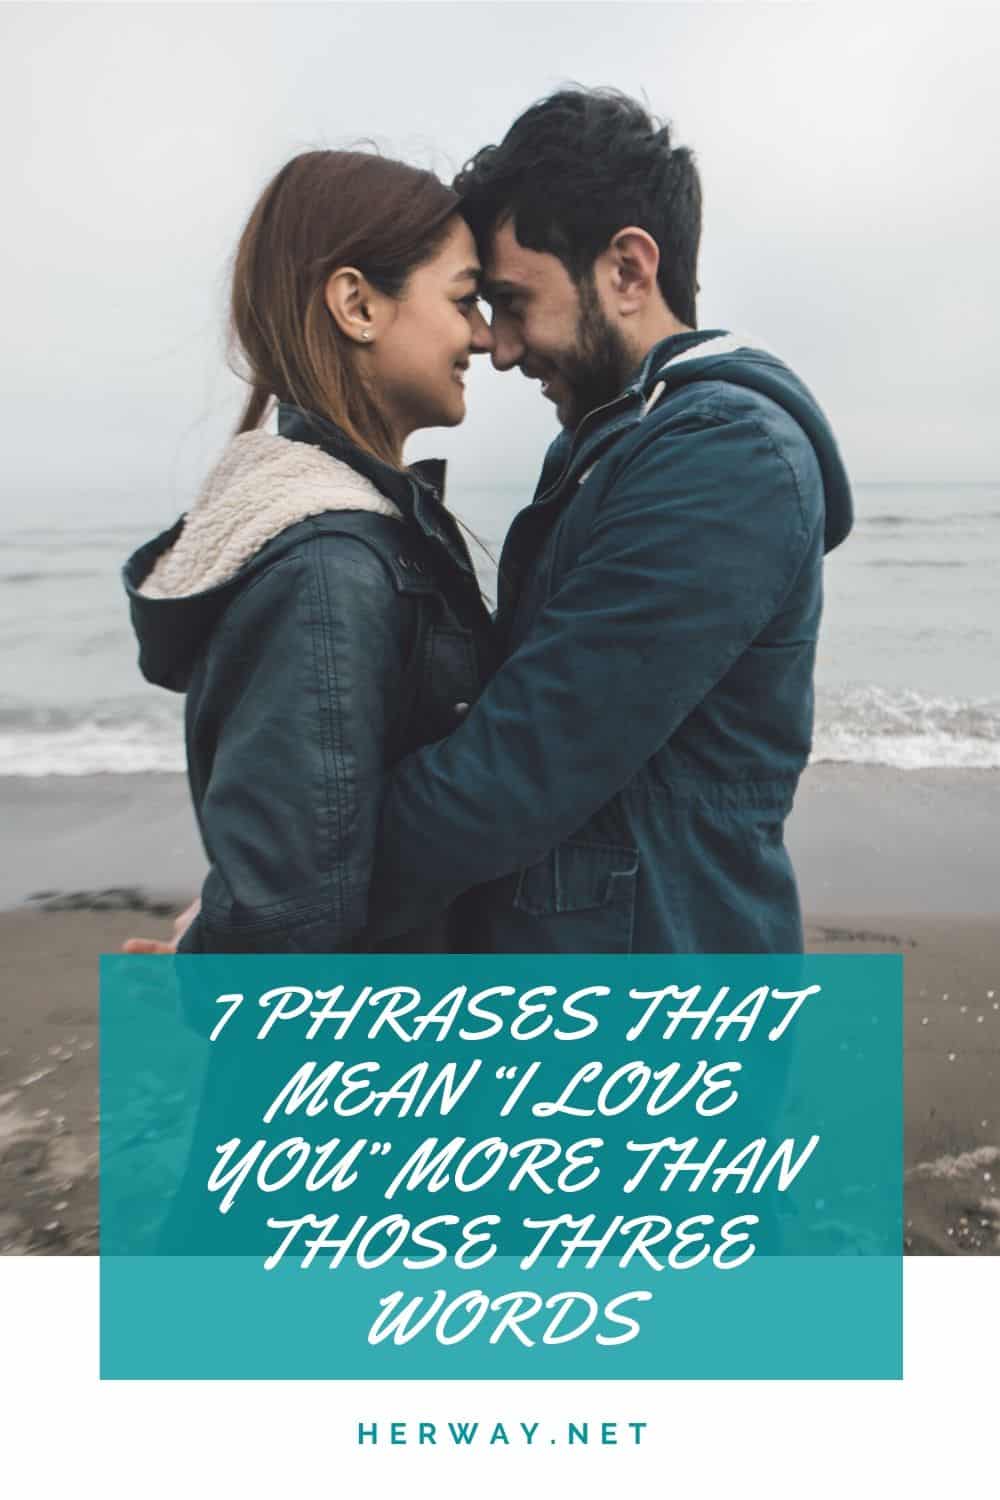 7 Phrases That Mean “I Love You” More Than Those Three Words